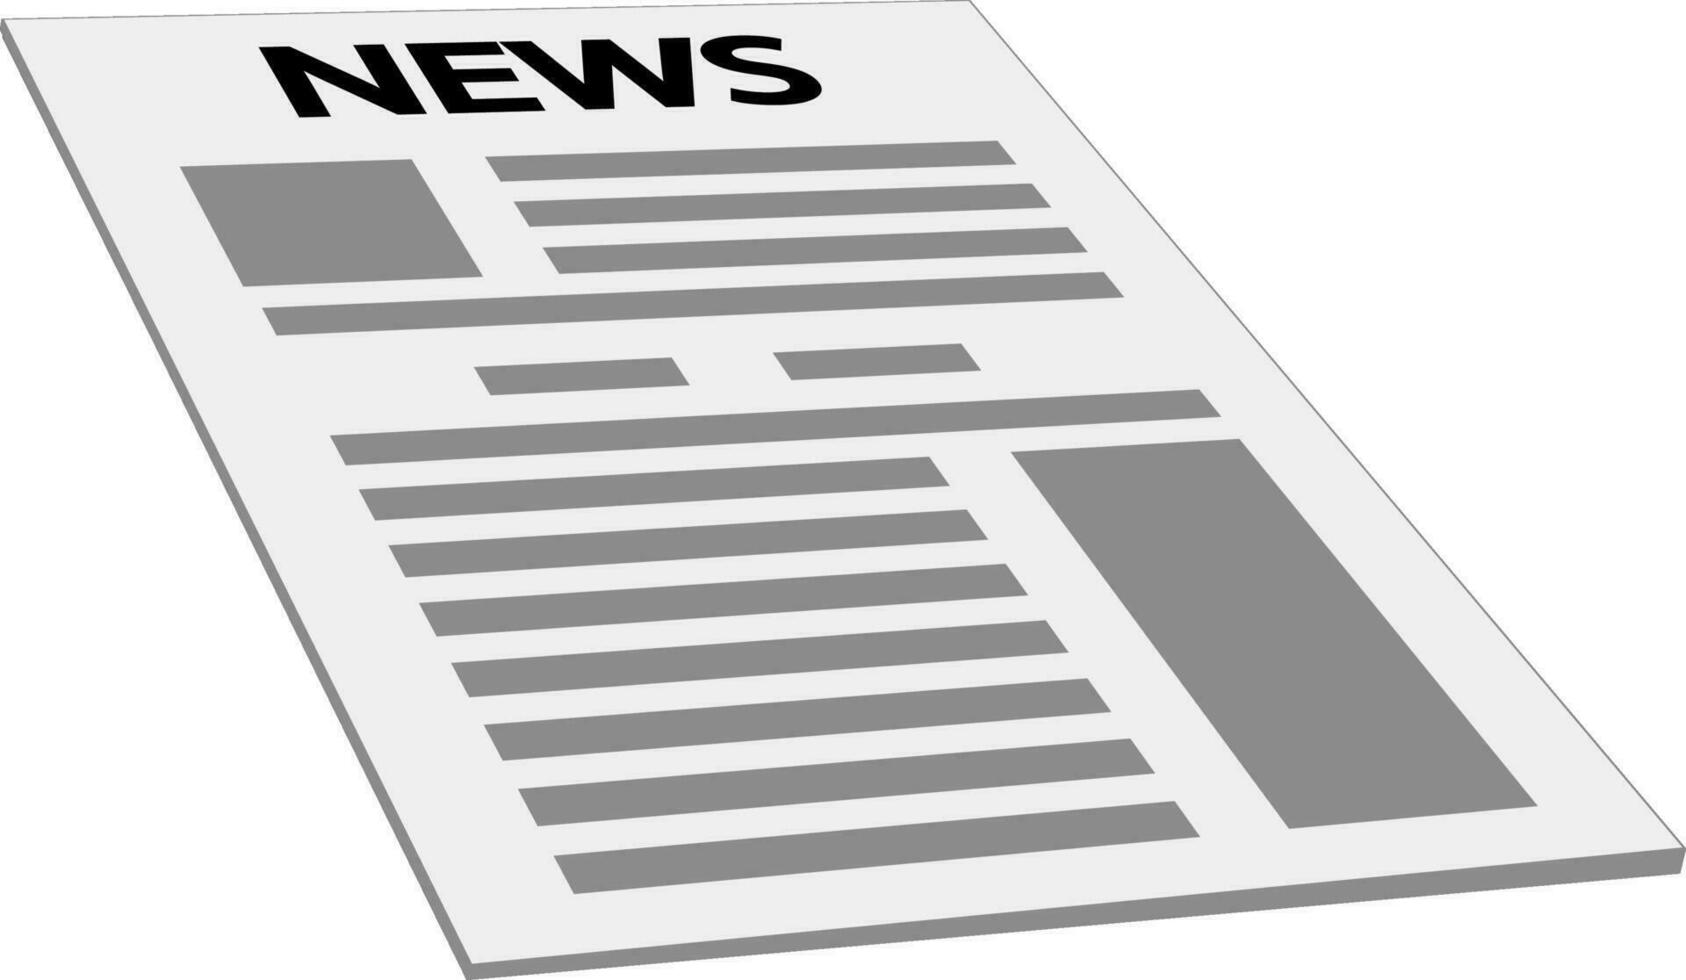 Newspaper news cover page icon mockup template first page news vector